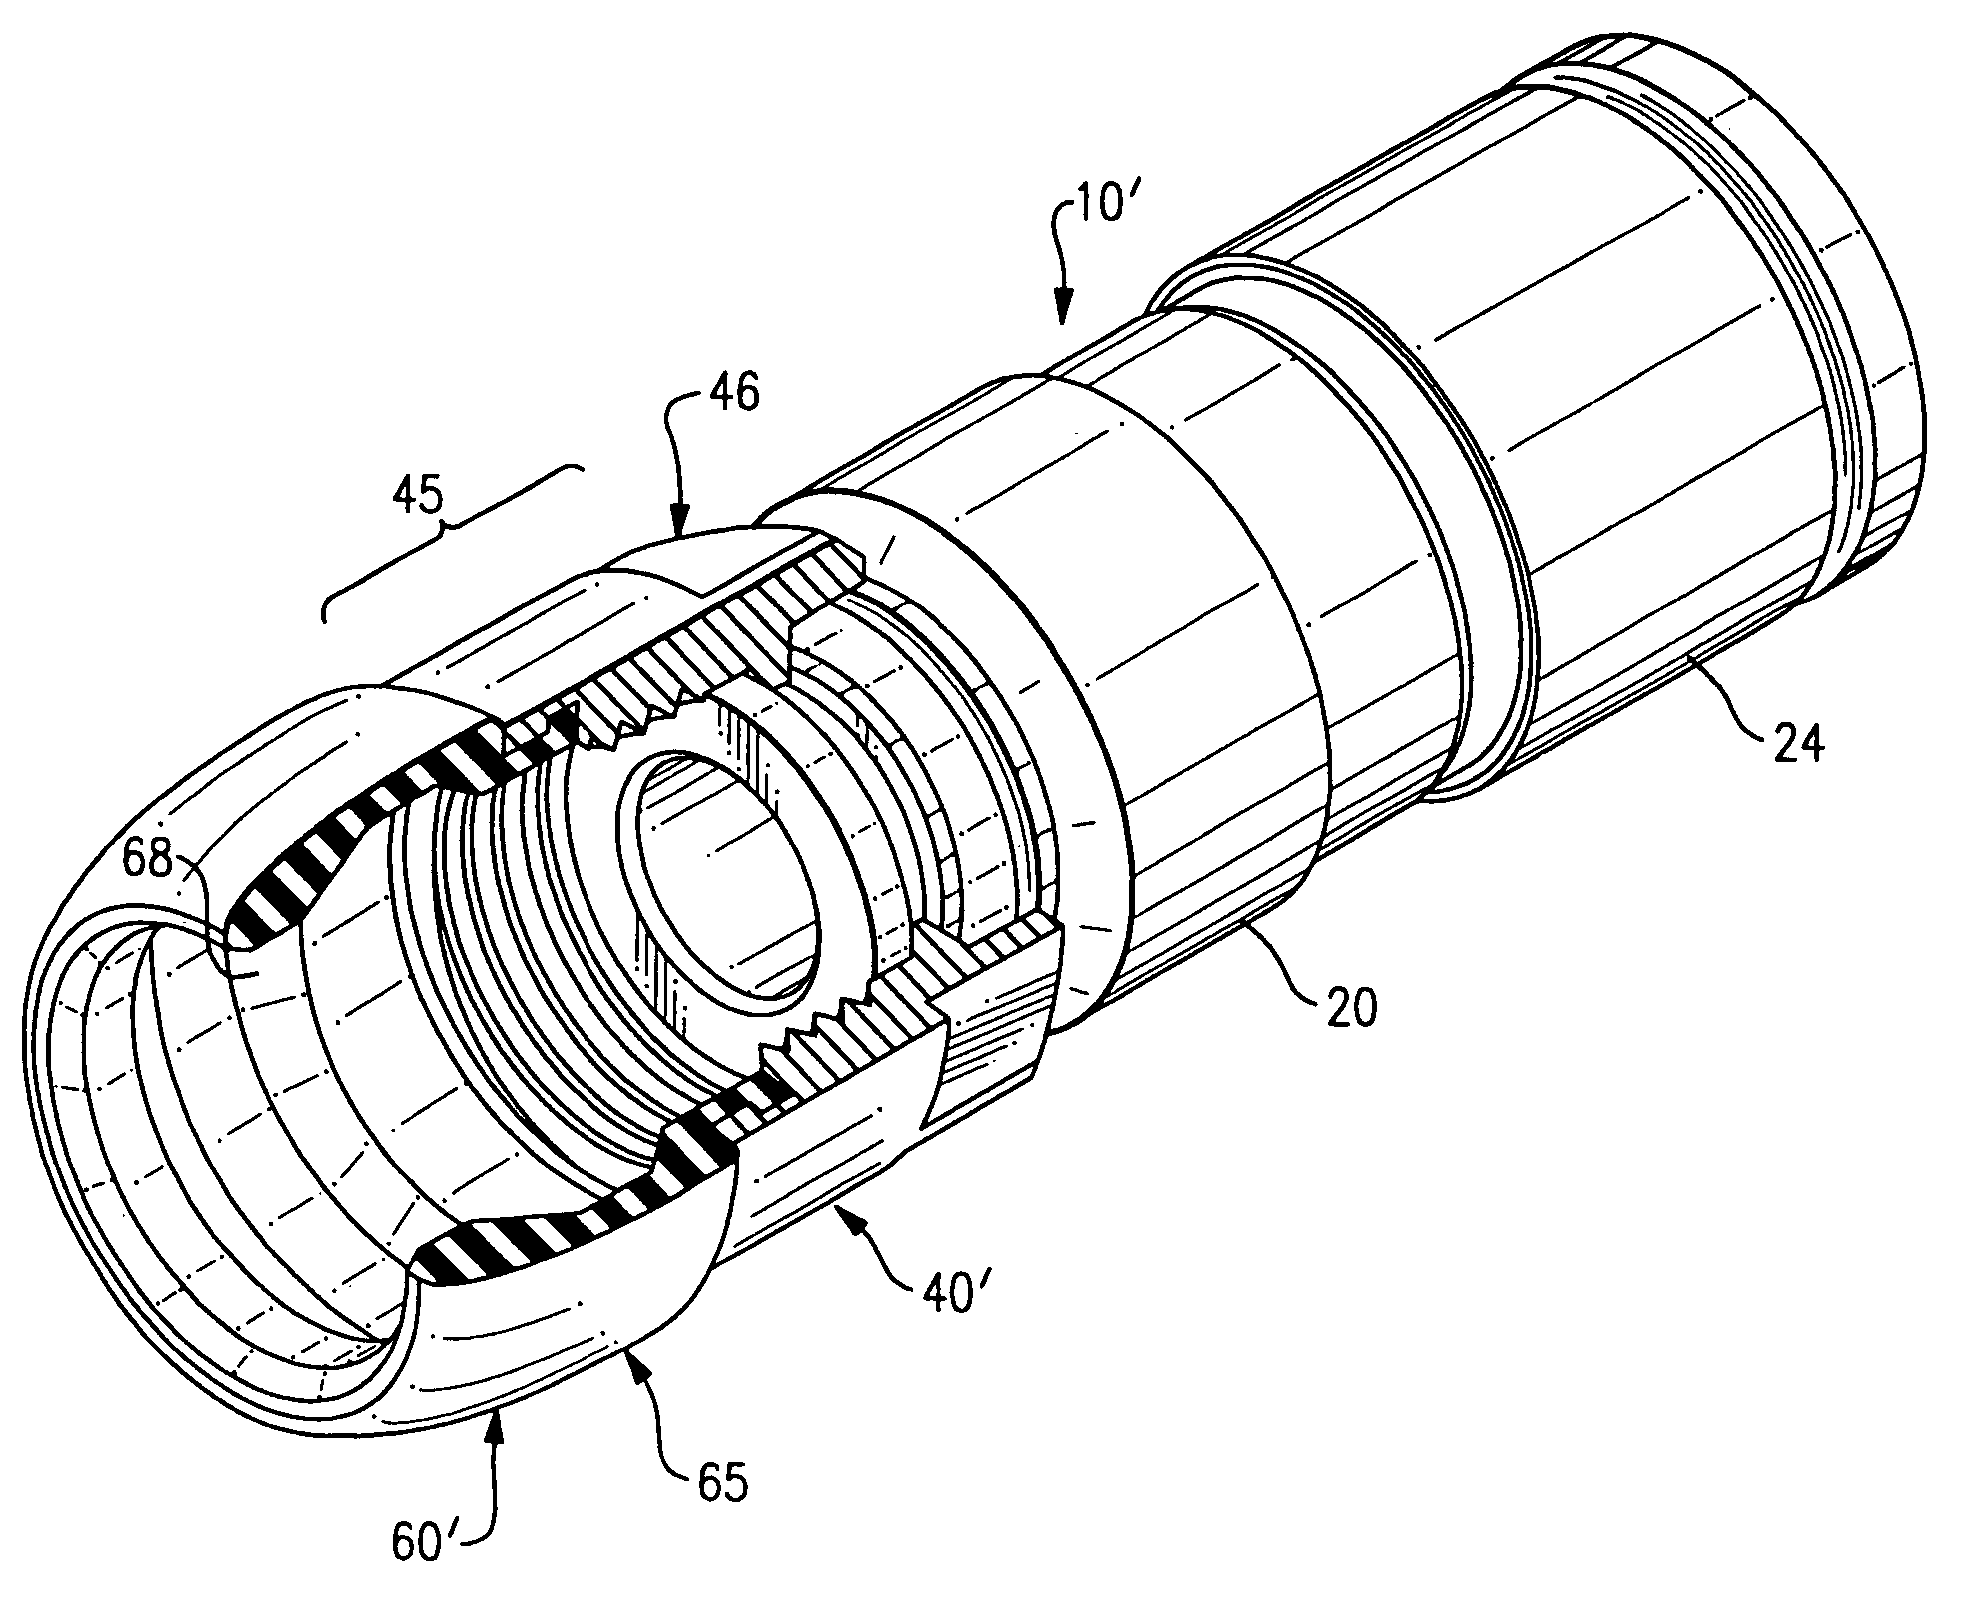 Nut seal assembly for coaxial cable system components